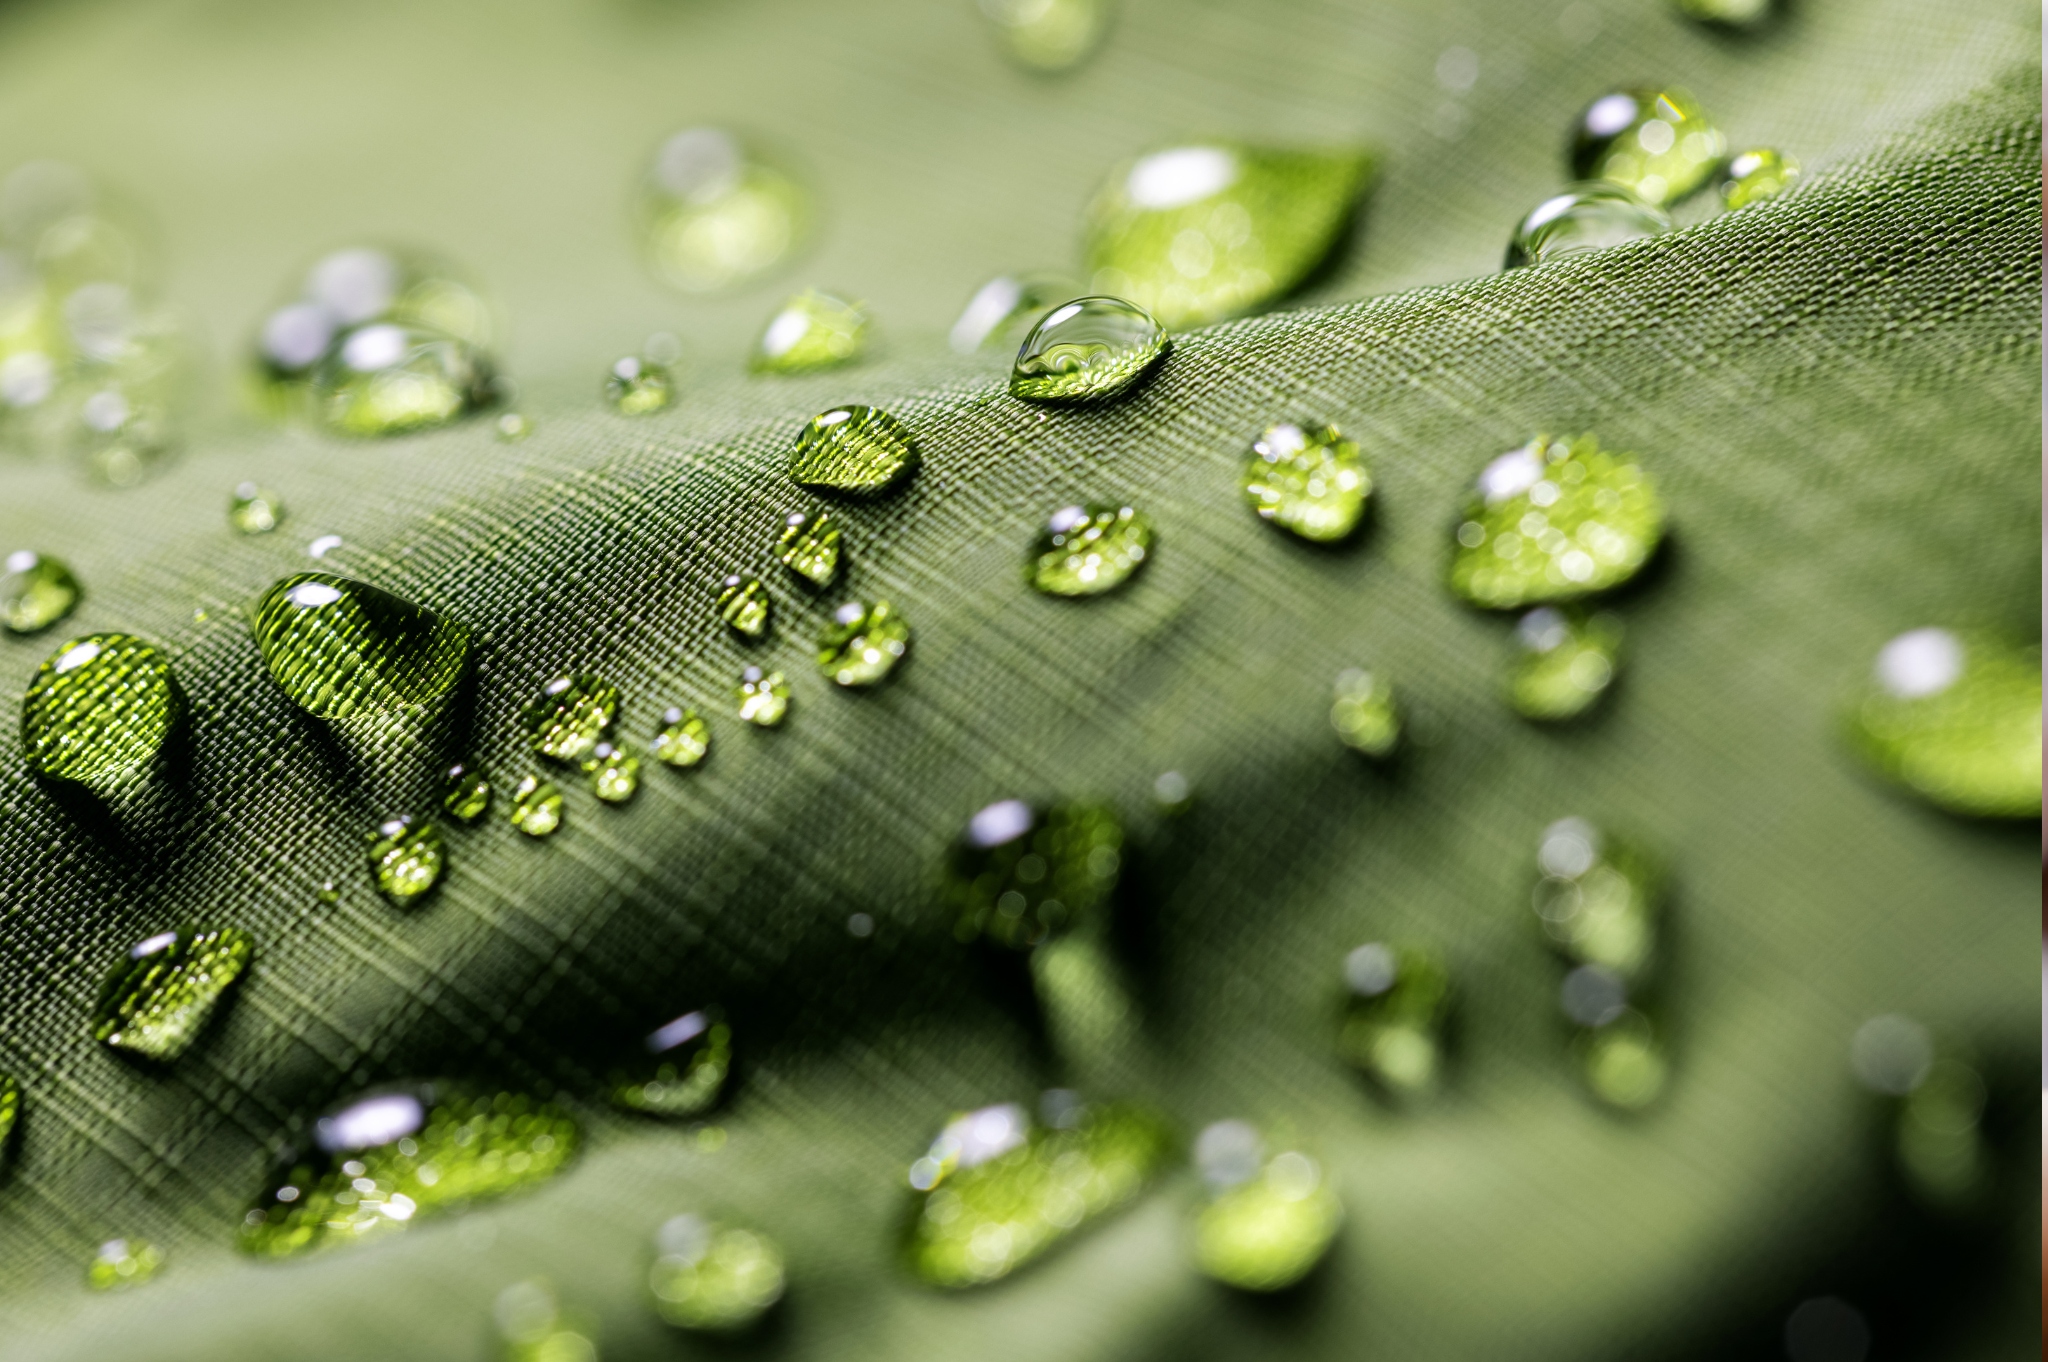 Green Textile with Water Droplets on It